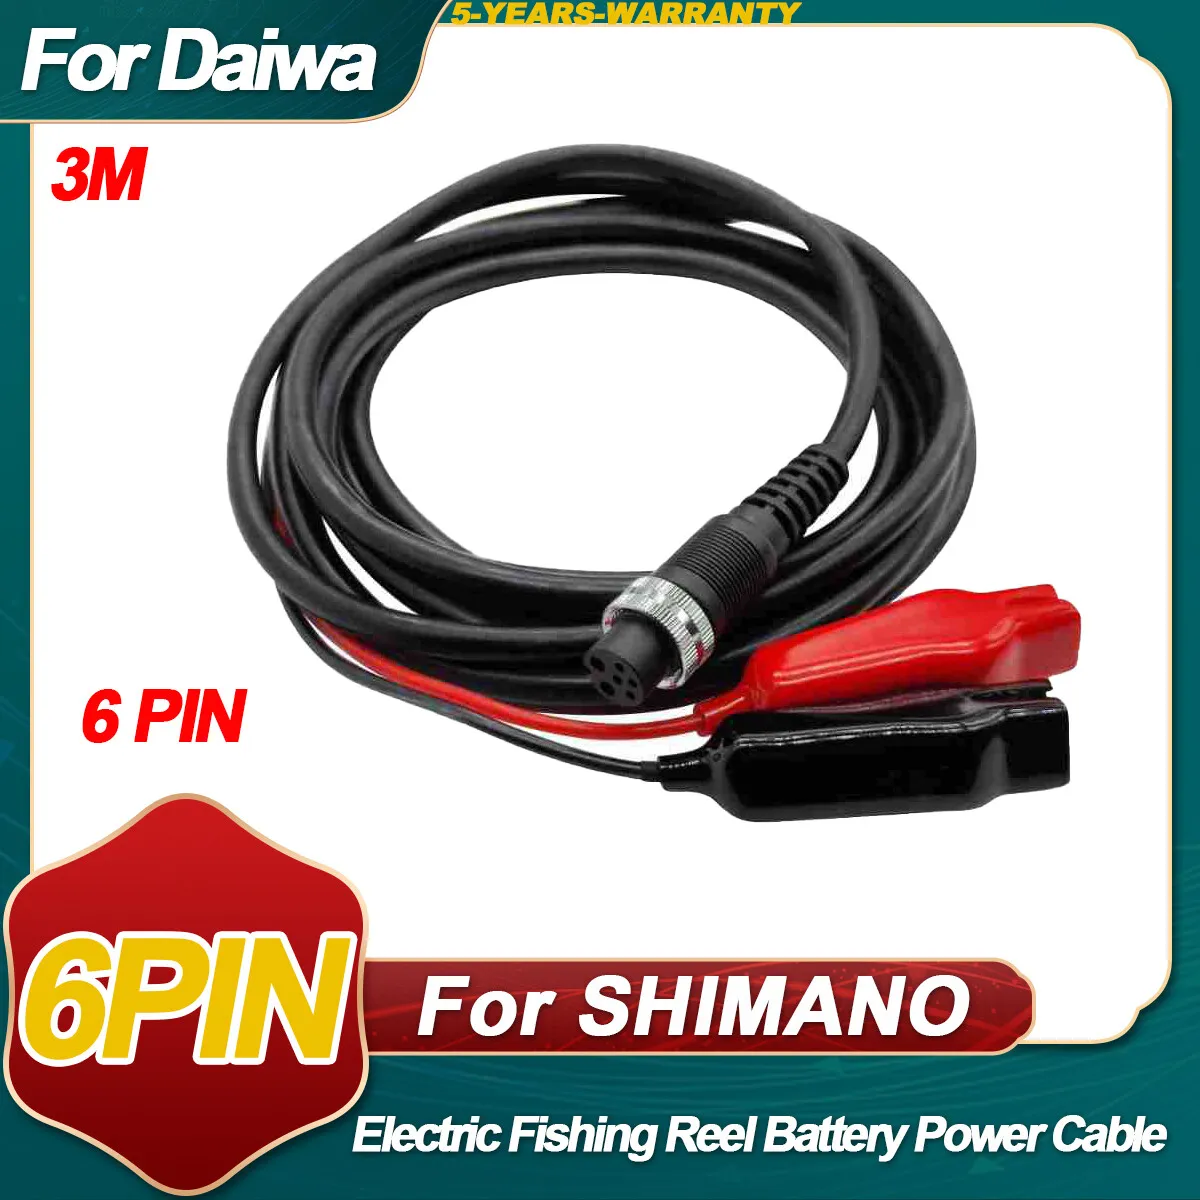 3.0M Power Cable For Shimano 6PIN Electric Reel Power Cord 6 Pin